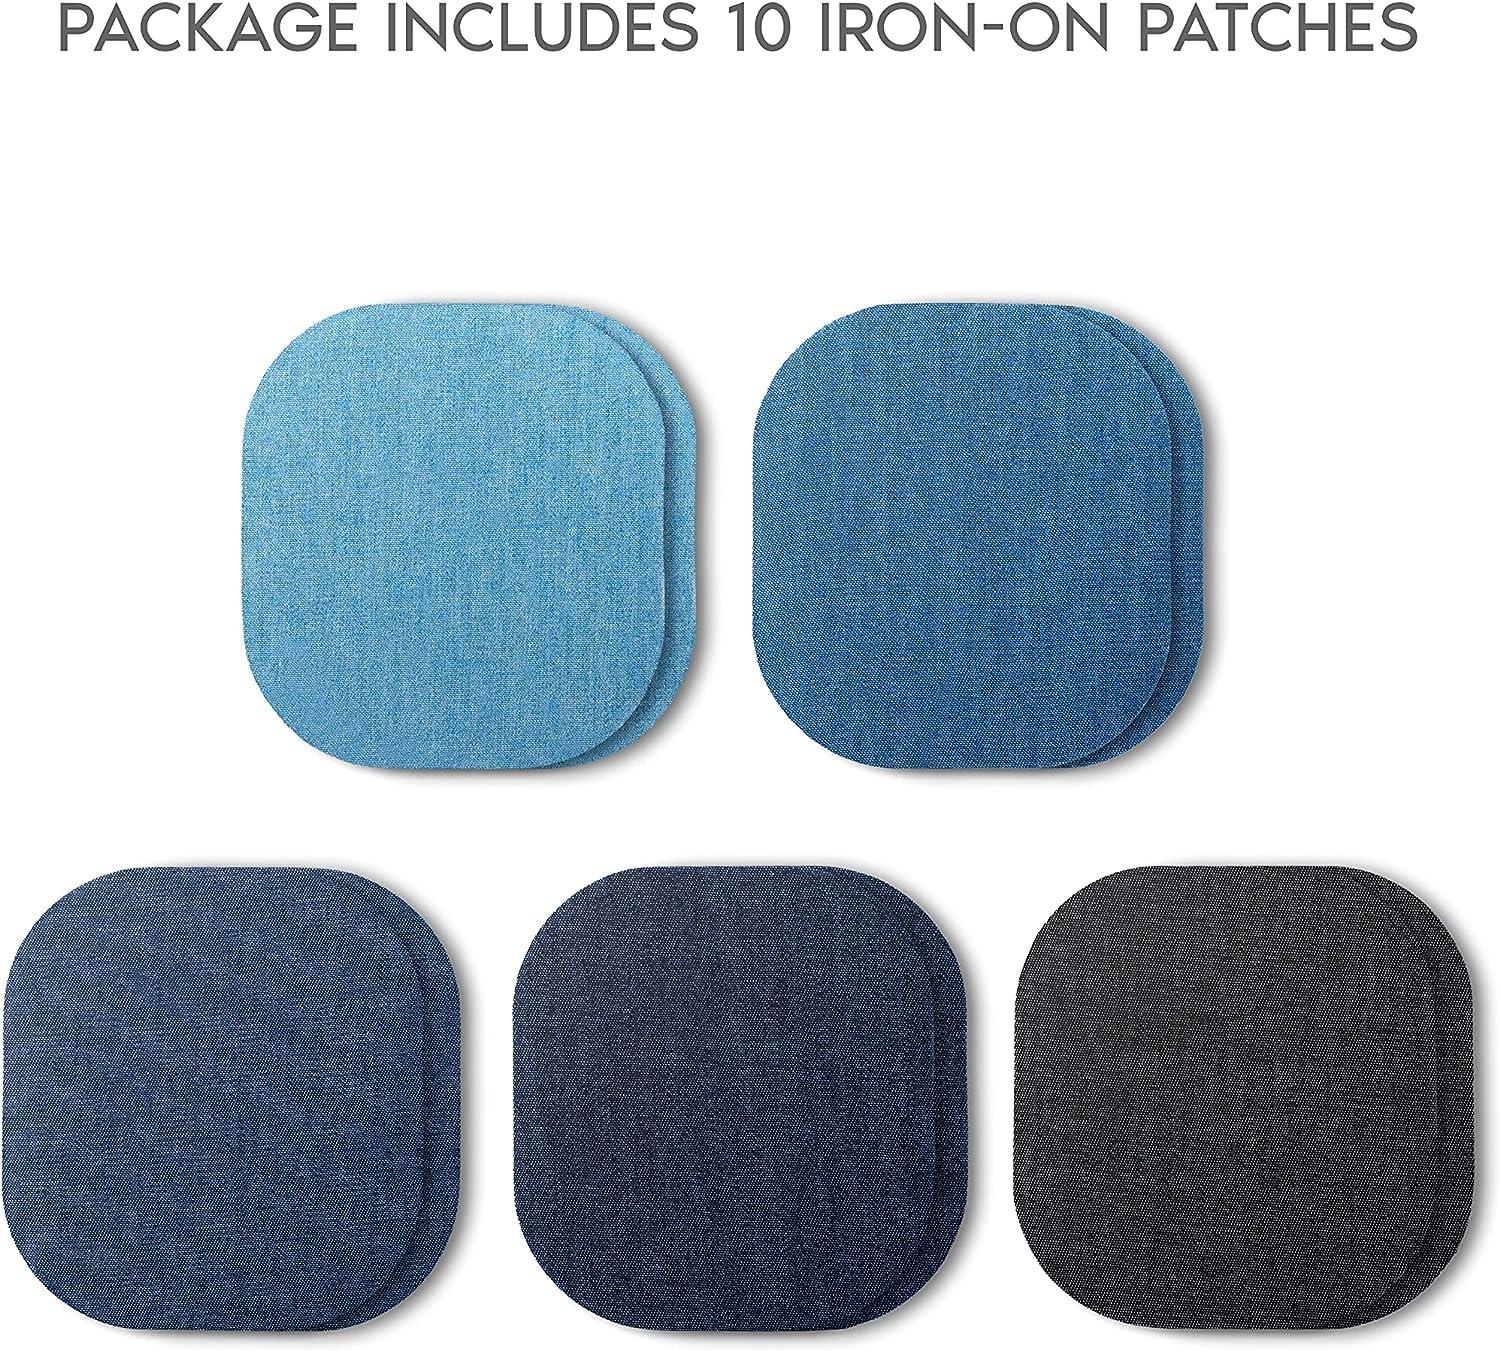 ZEFFFKA Premium Quality Denim Iron-on Jean Patches Inside & Outside  Strongest Glue 100% Cotton Assorted Shades of Blue Black Repair Decorating  Kit 10 Pieces Size 4-1/4 by 3-3/4 (9.8 cm x 10.8 cm)